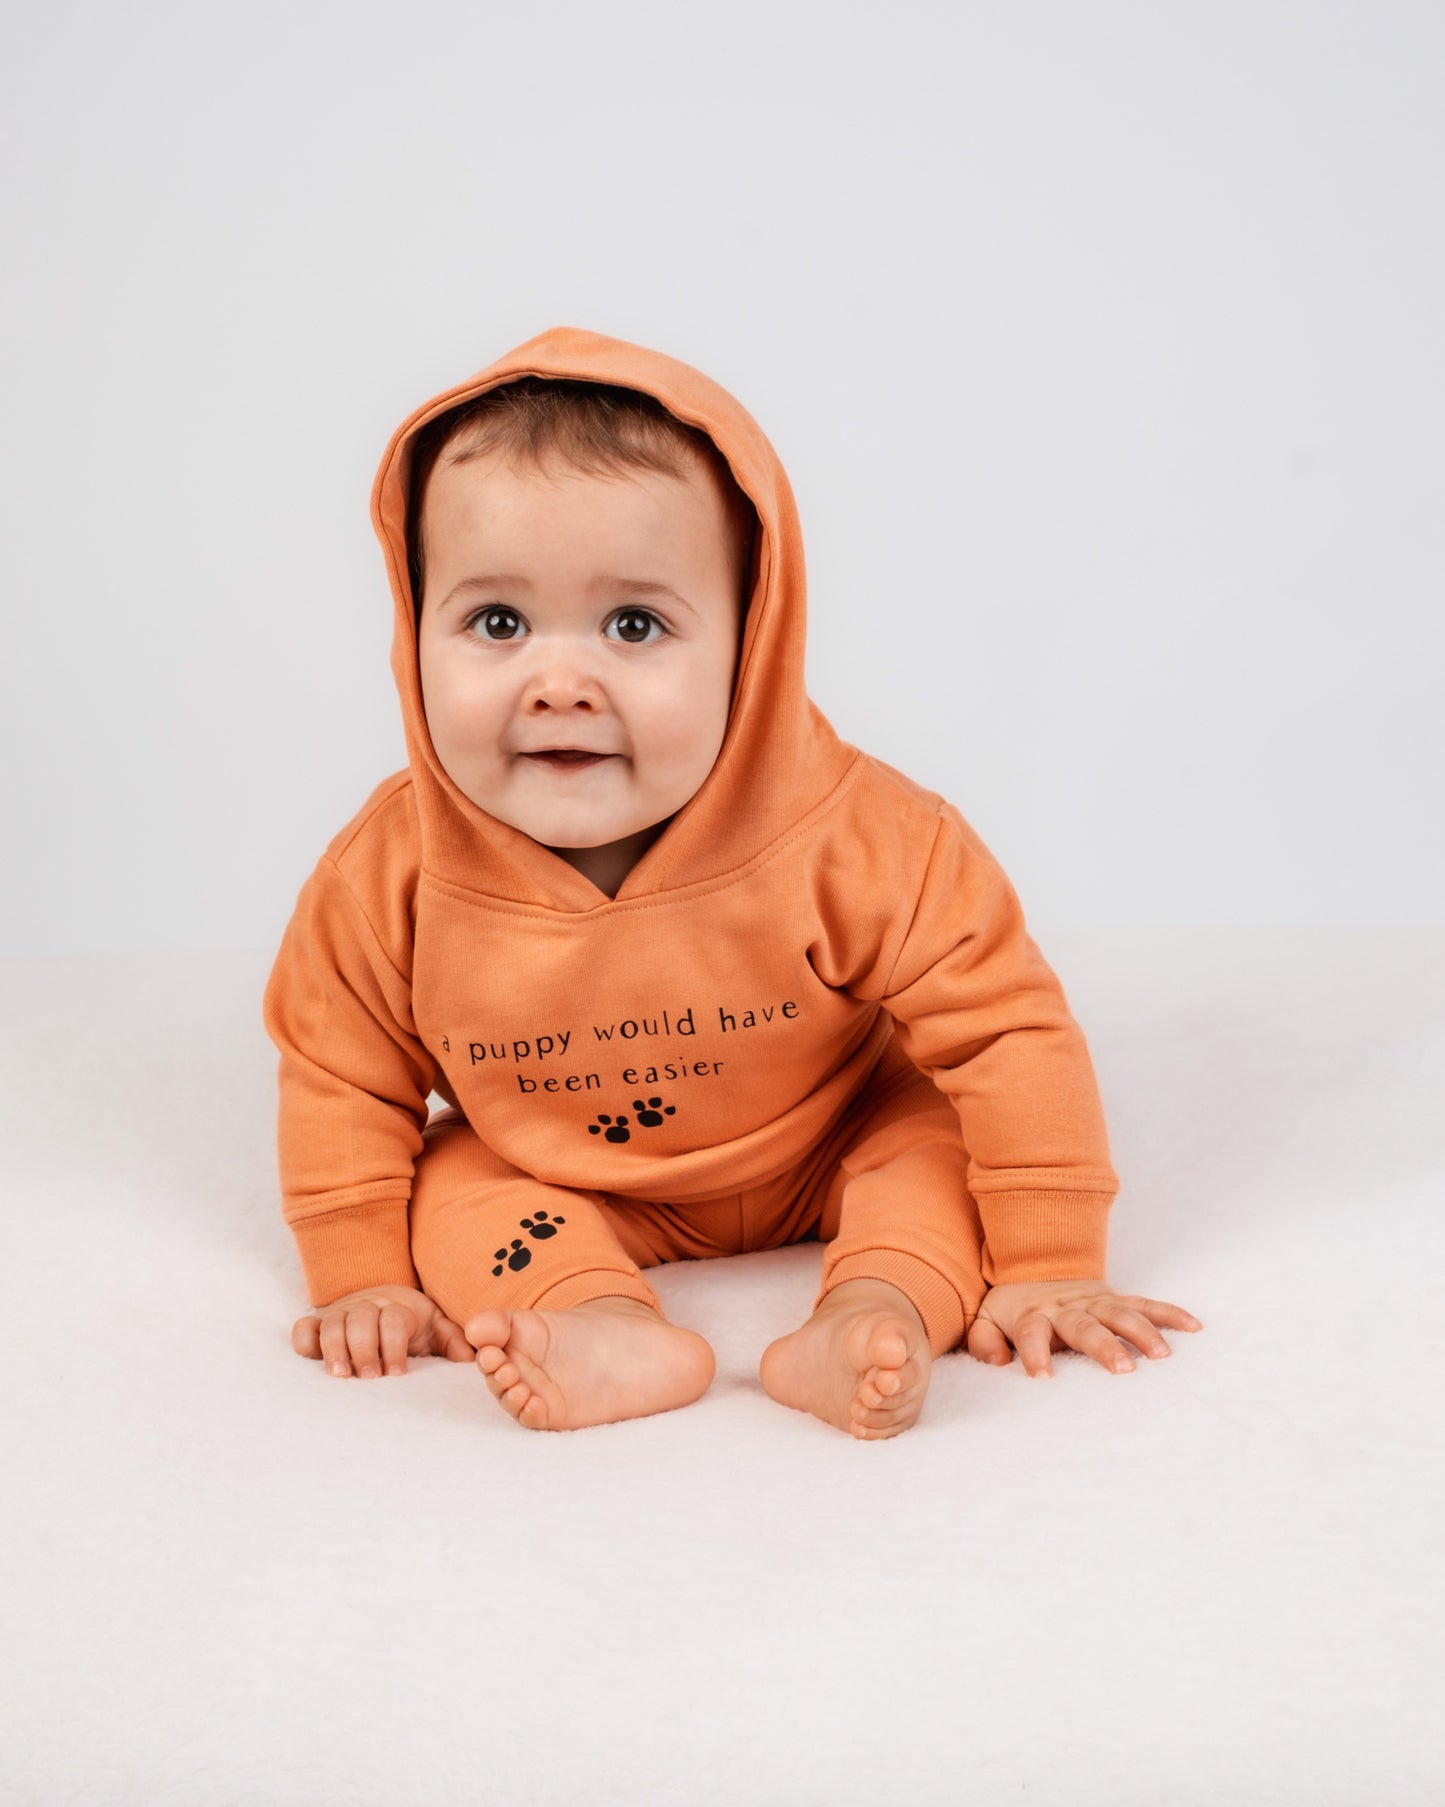 A Puppy Would Have Been Easier - Baby Hoodie